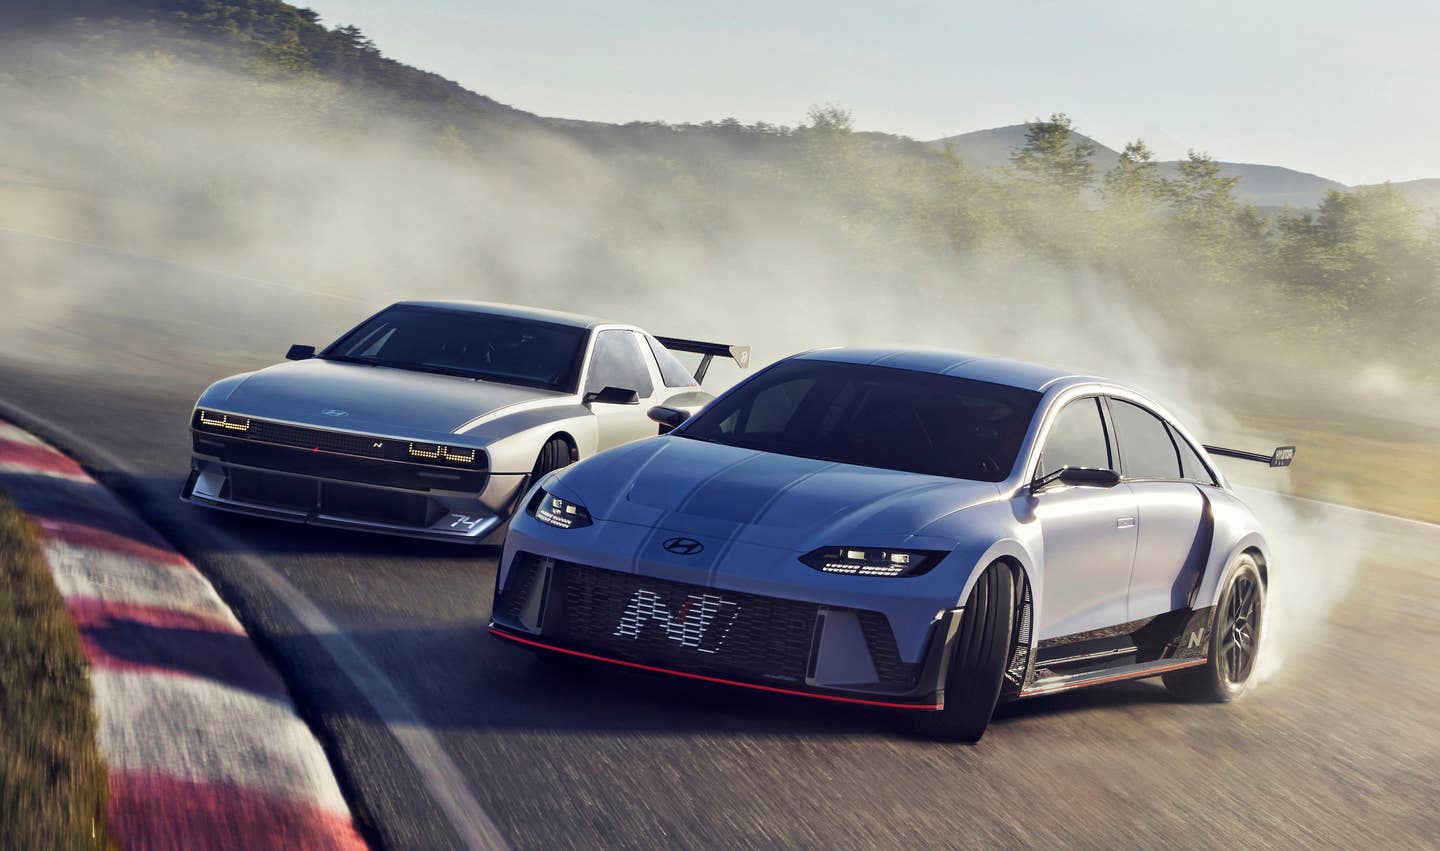 Hyundai’s N Brand Just Put EV Performance on Notice With Two Amazing Concepts